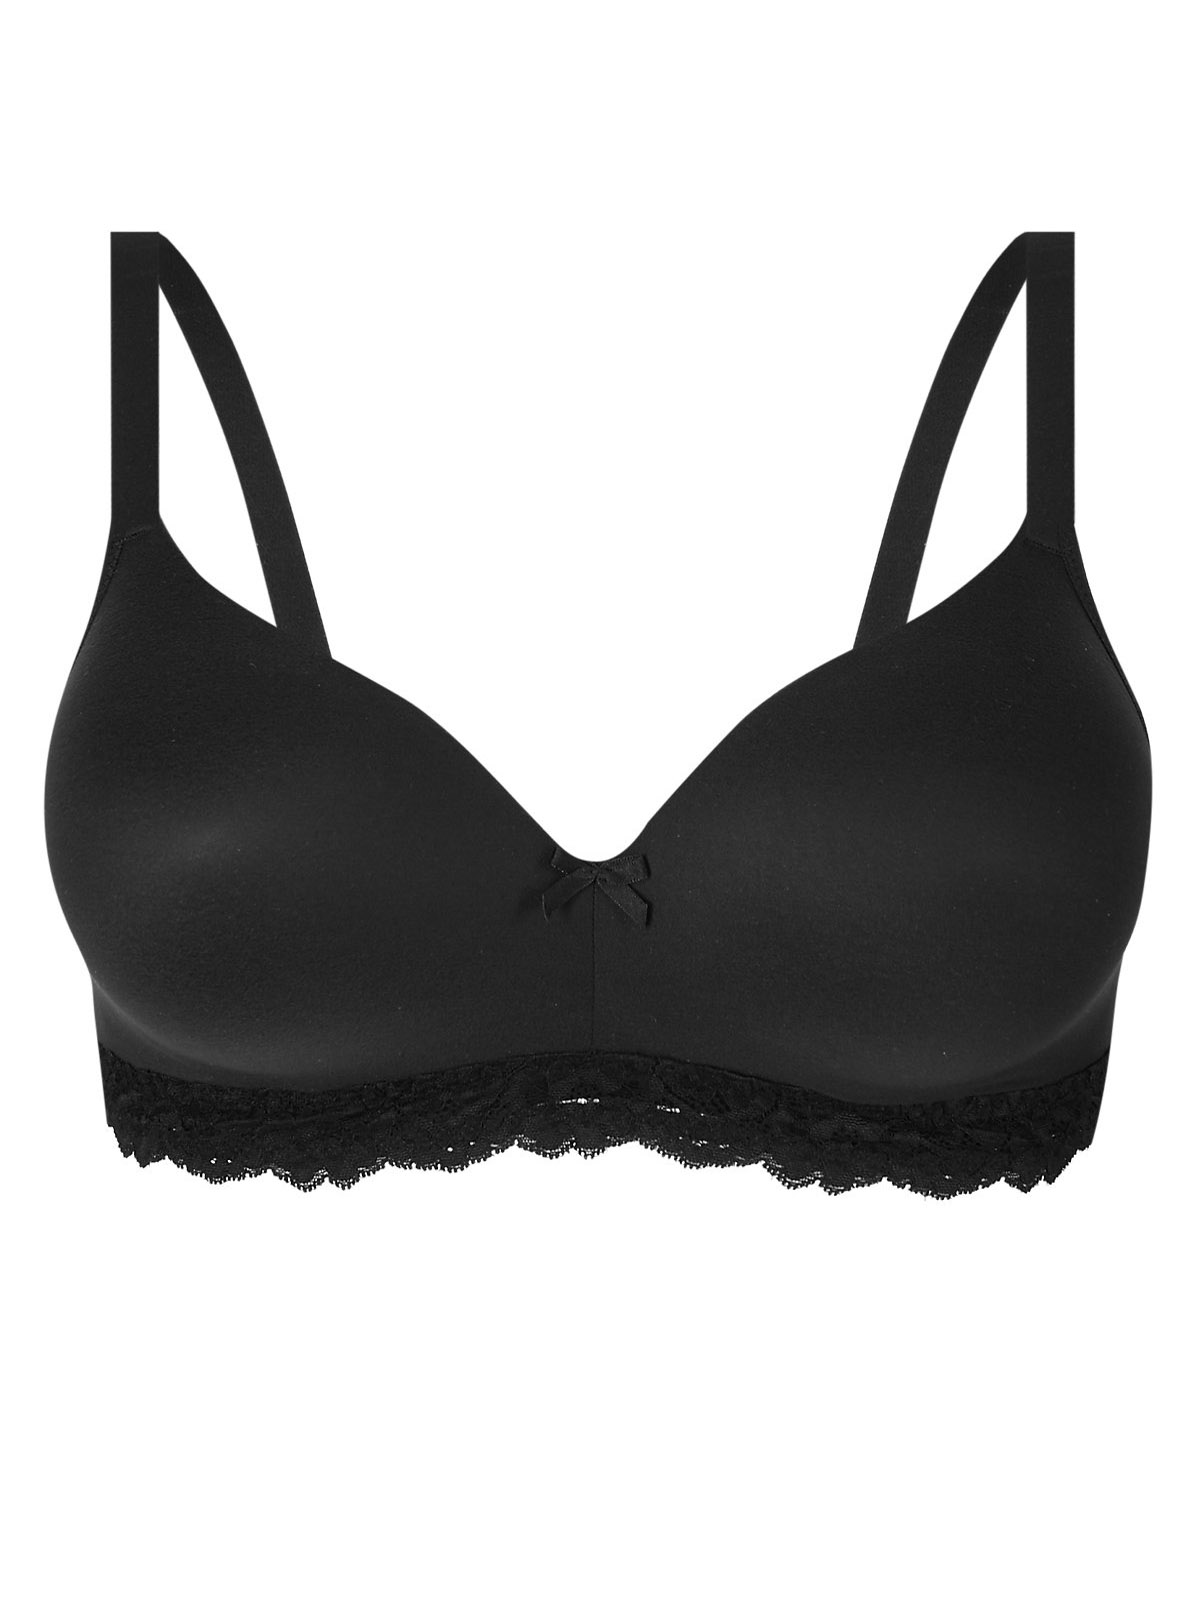 Marks and Spencer - - M&5 ASSORTED Plain, Printed & Lace Bras - Size 32 ...